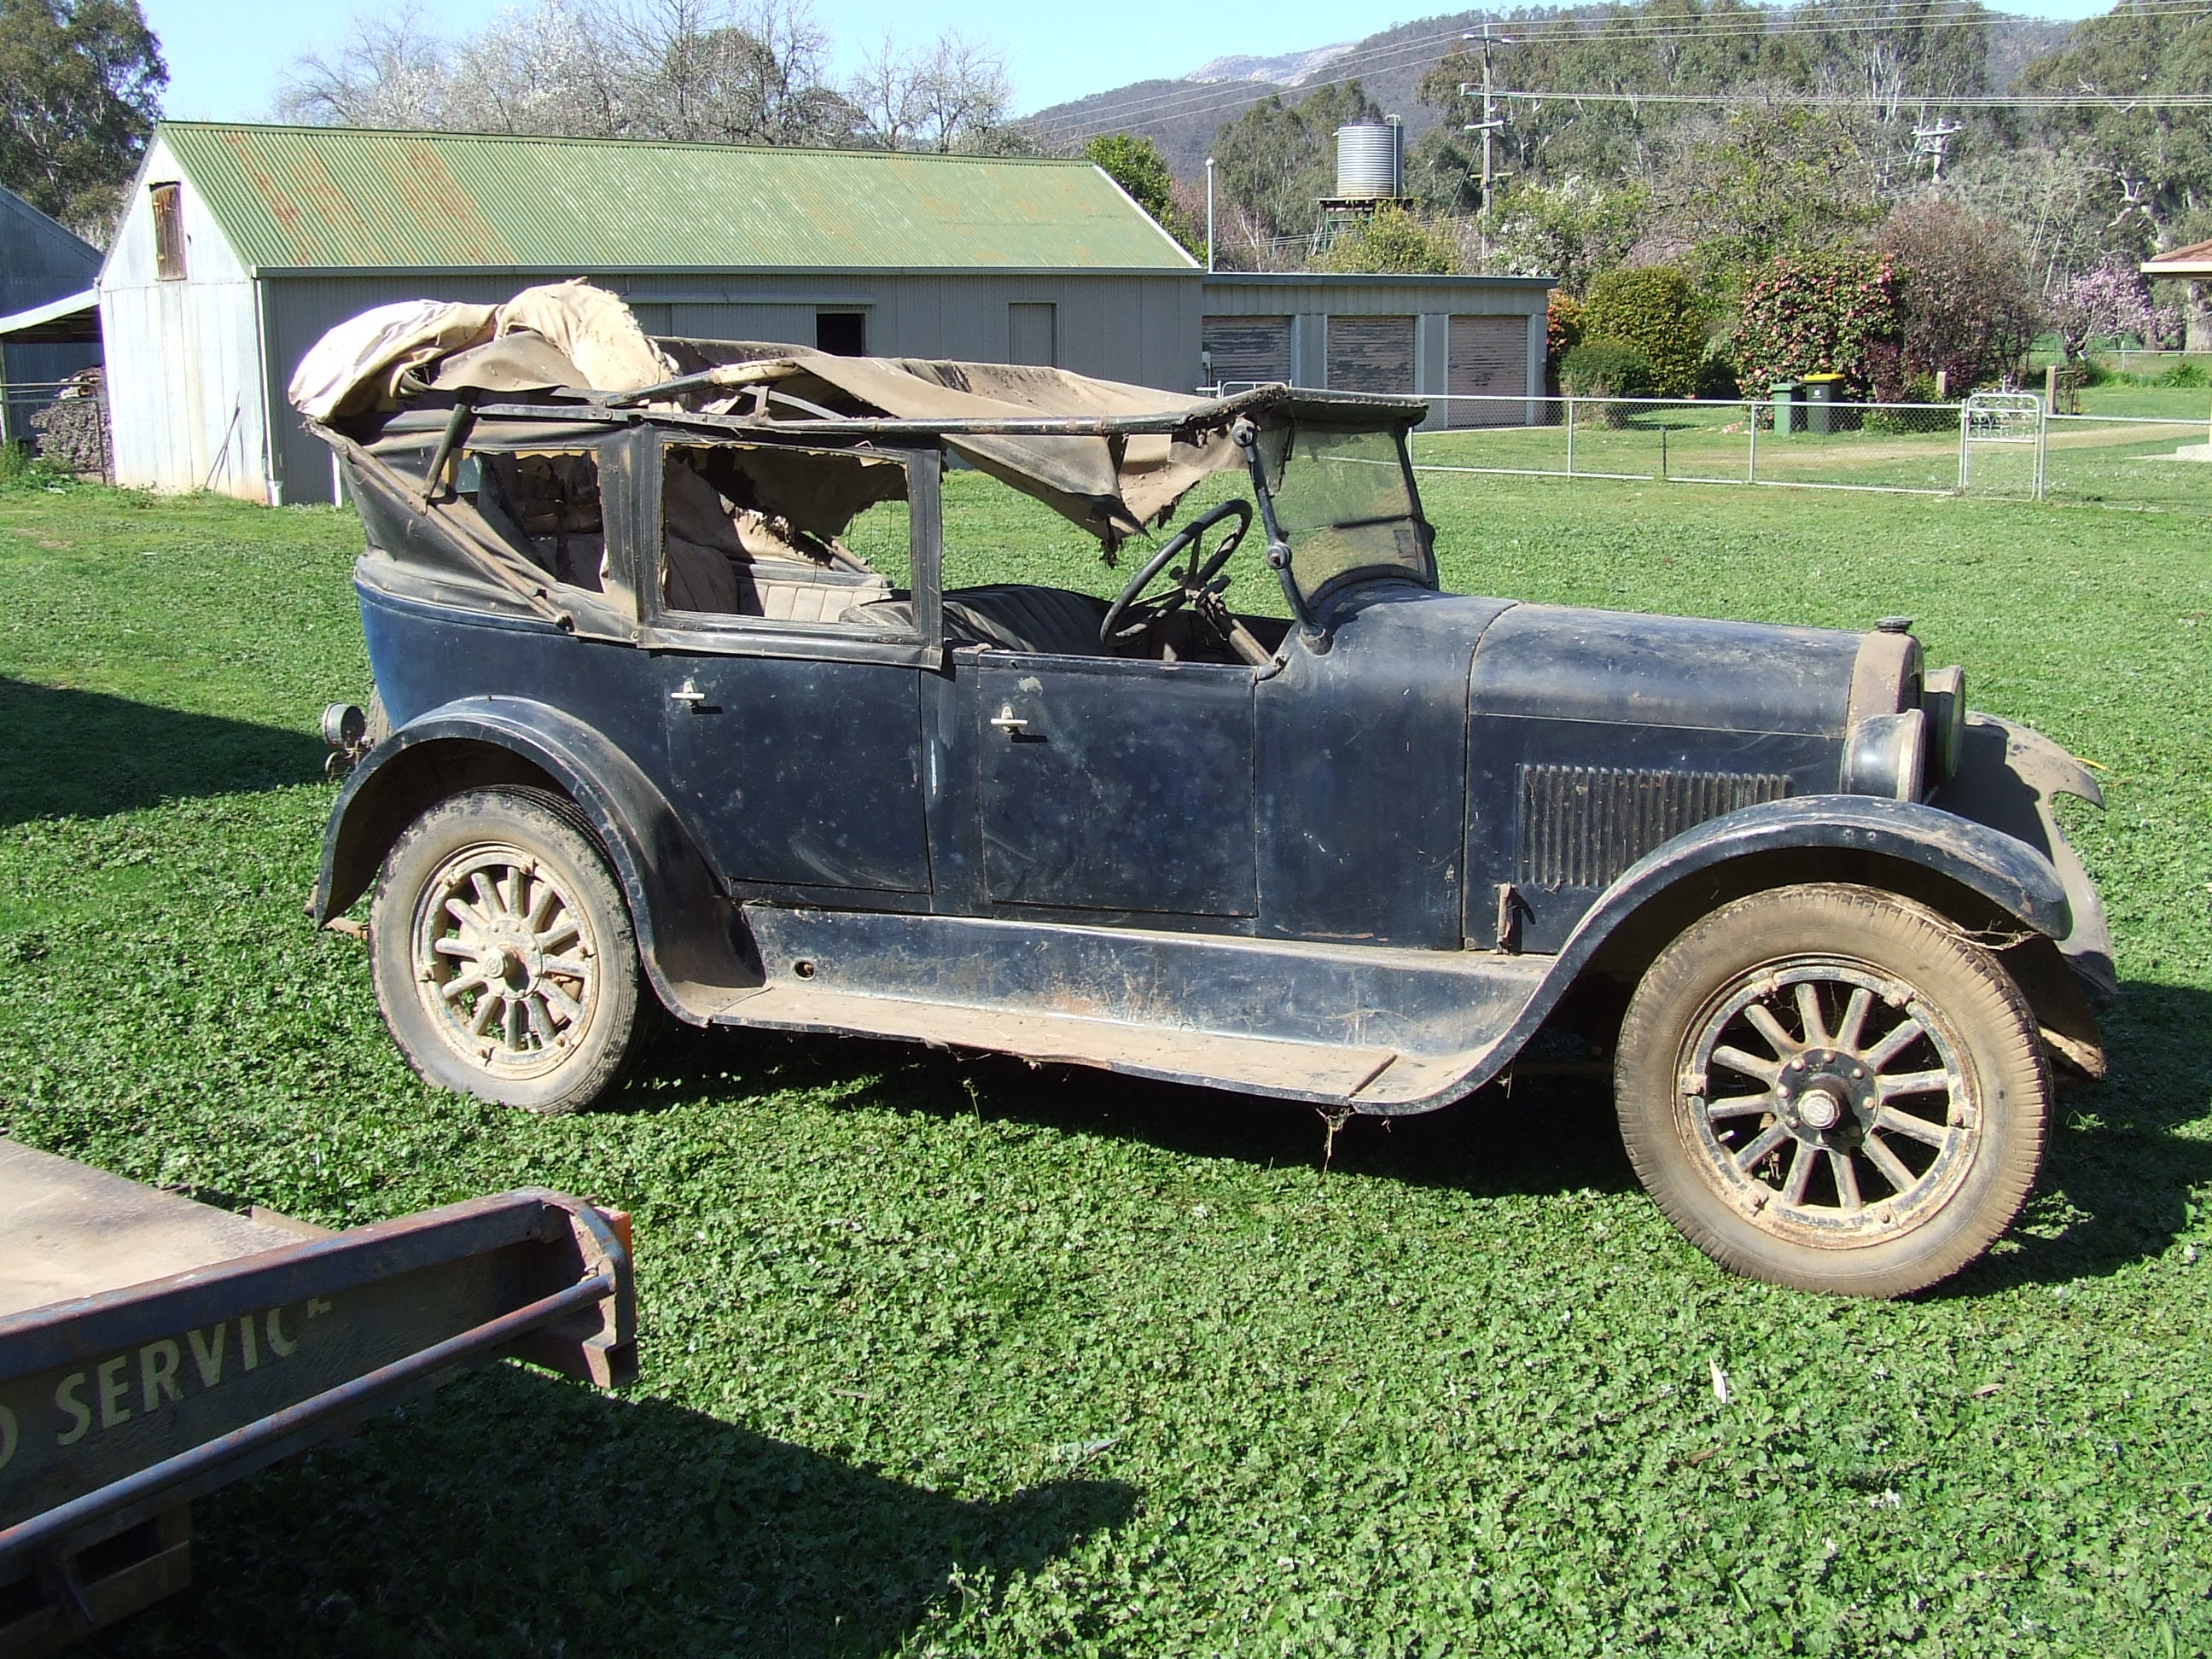 Steve Sharp sent us these photos of his 1925 dodge touer an amazing barn